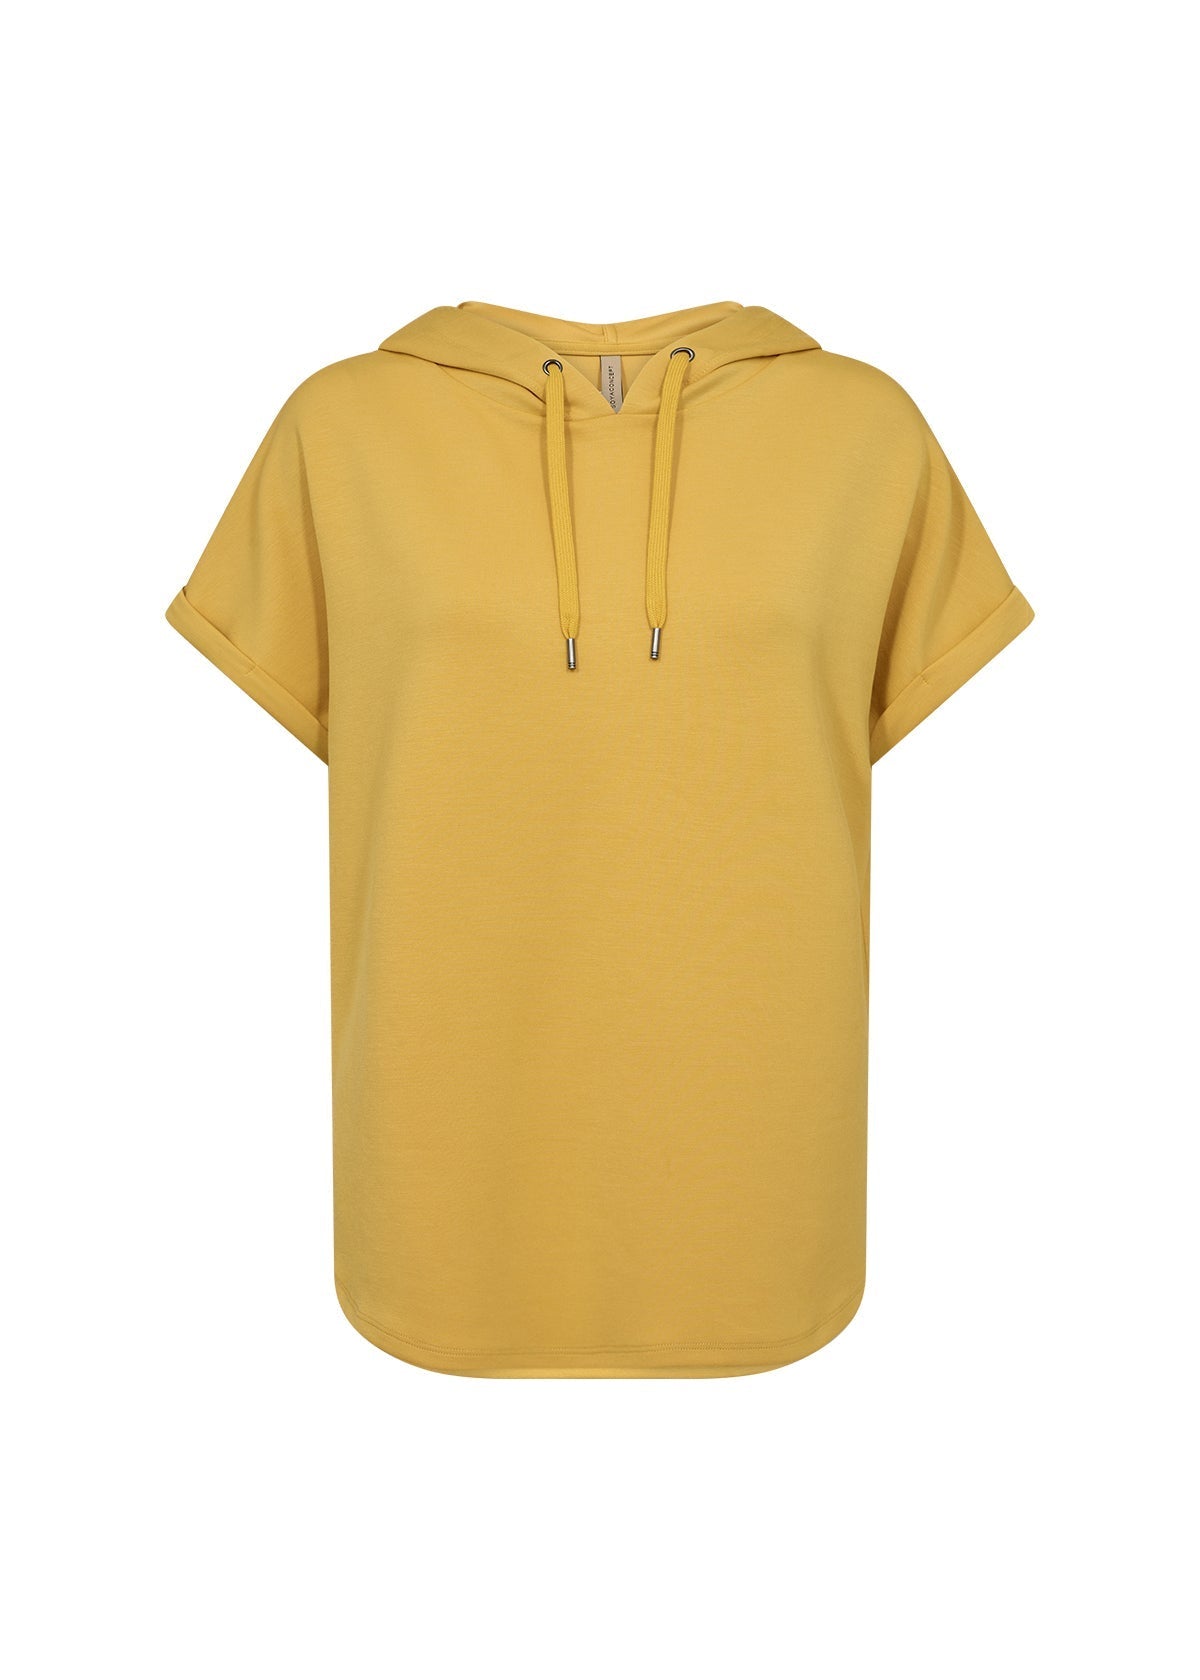 Soya Concept (26166) Short Dolman Sleeve Hooded Banu Popover in Golden Yellow